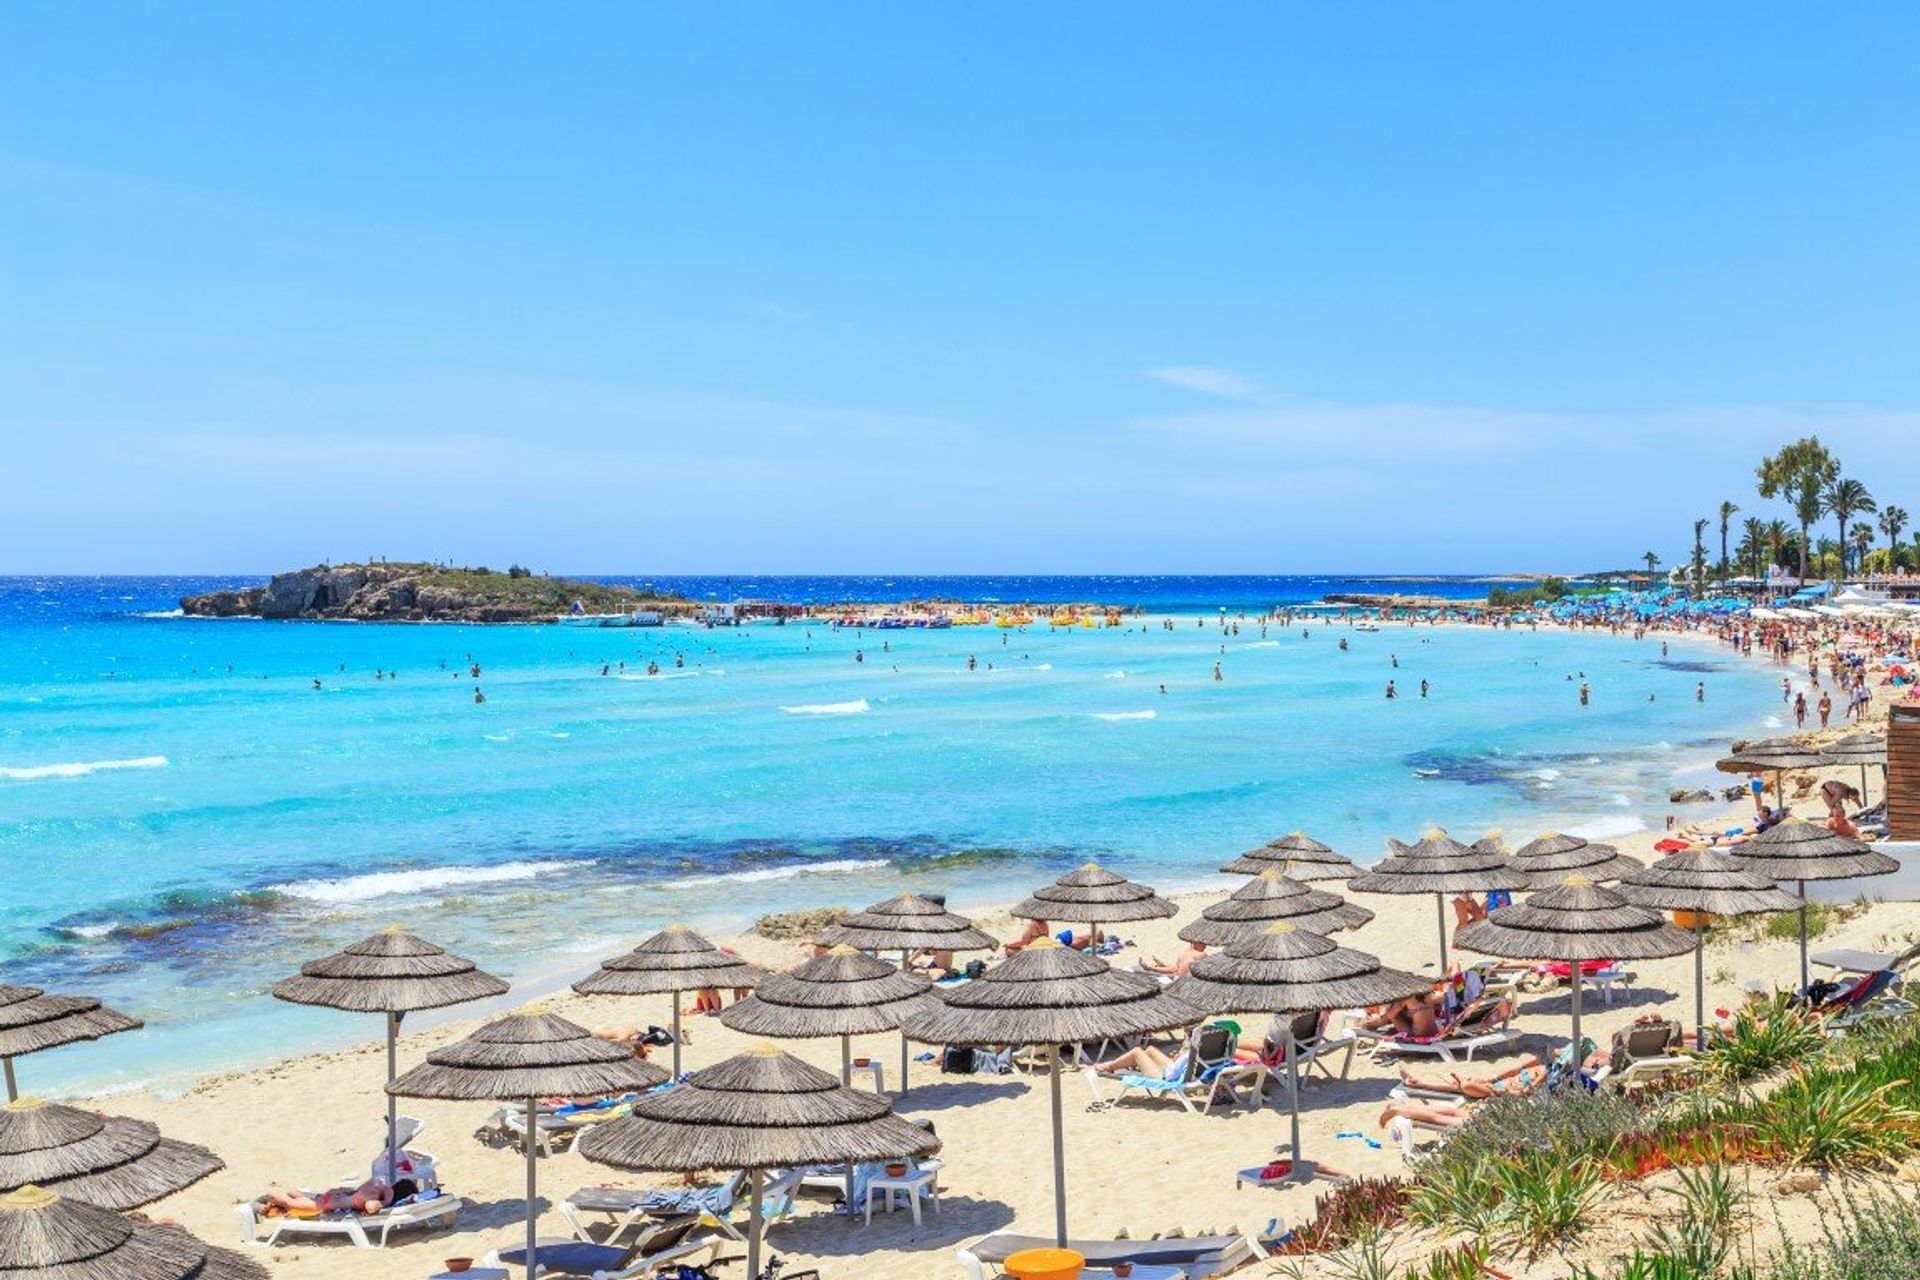 Nissi beach in Ayia Napa is the most famous on the island, lively with bars and sunbathers